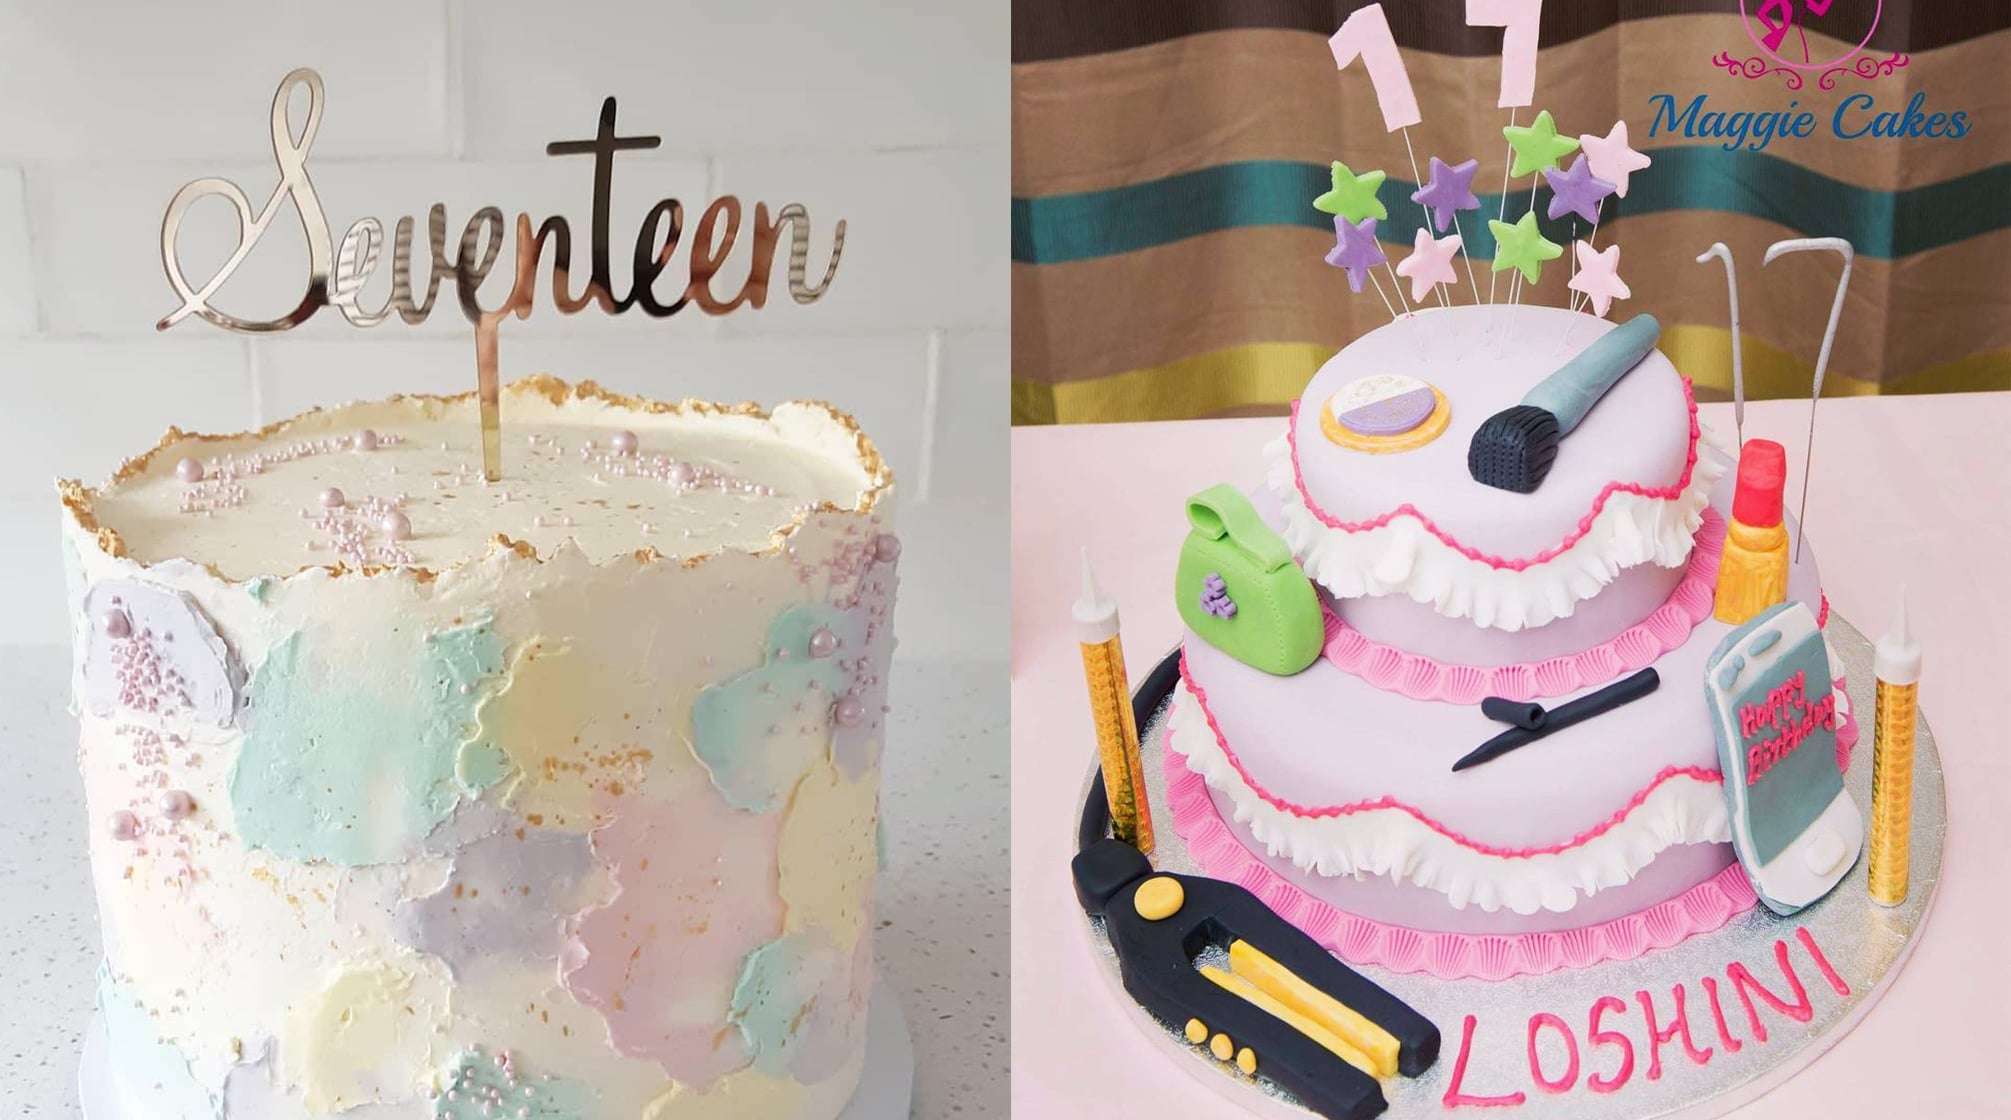 24 Piece 17th Birthday Decorations For Girls, 17 Year Old Girl Gift Ideas,  17th Birthday Gifts For Girls, 17 th Birthday Decorations, 17 Birthday Cake